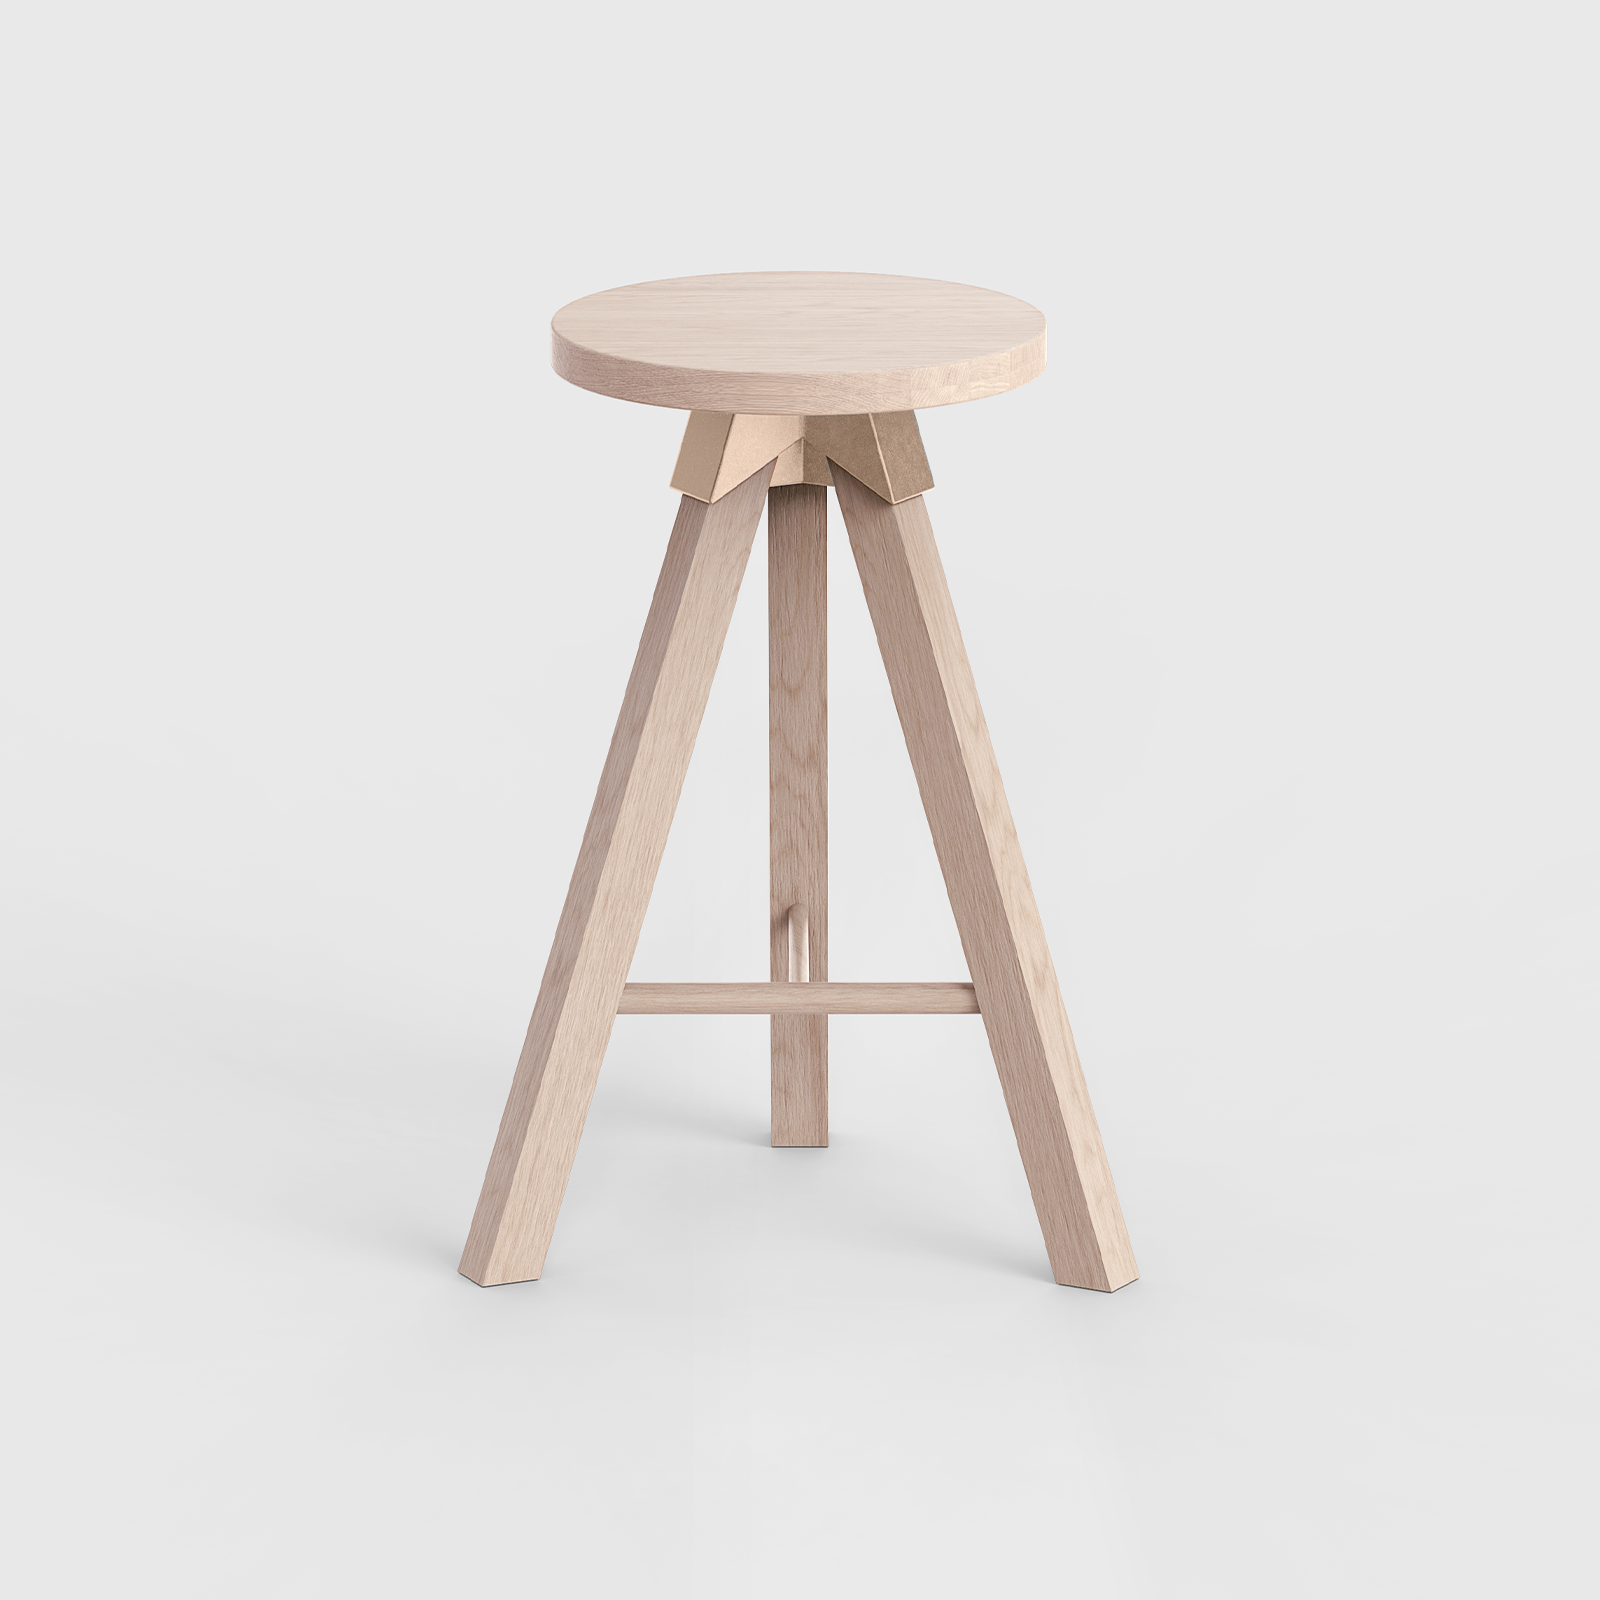 A-joint tall stool in solid Victorian Ash with cast bronze A-joint